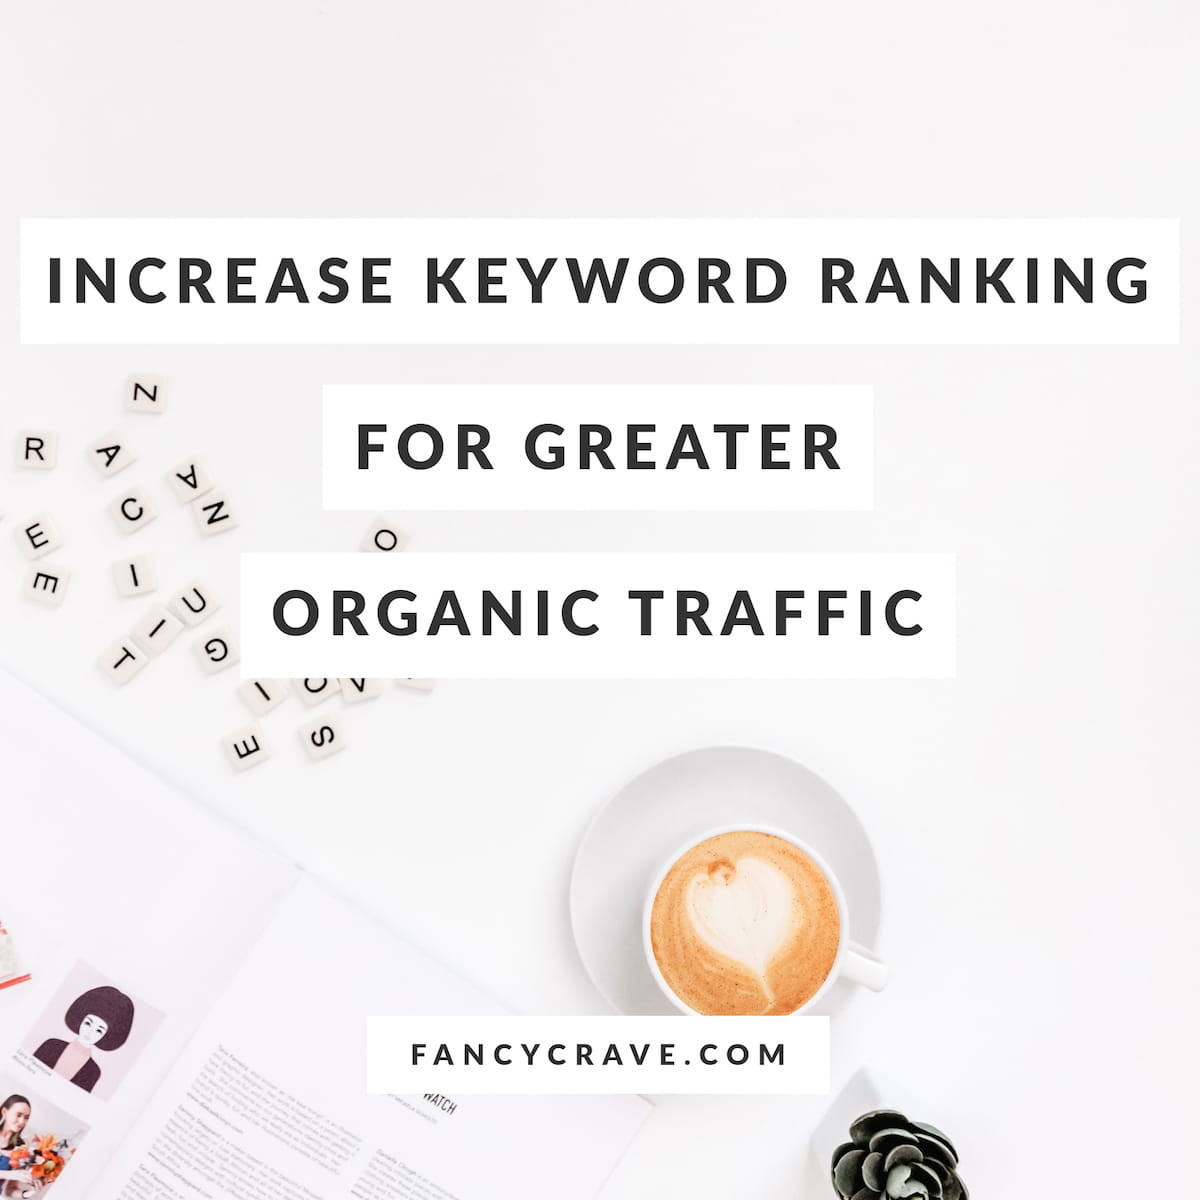 How to Increase Keyword Ranking for Greater Organic Traffic